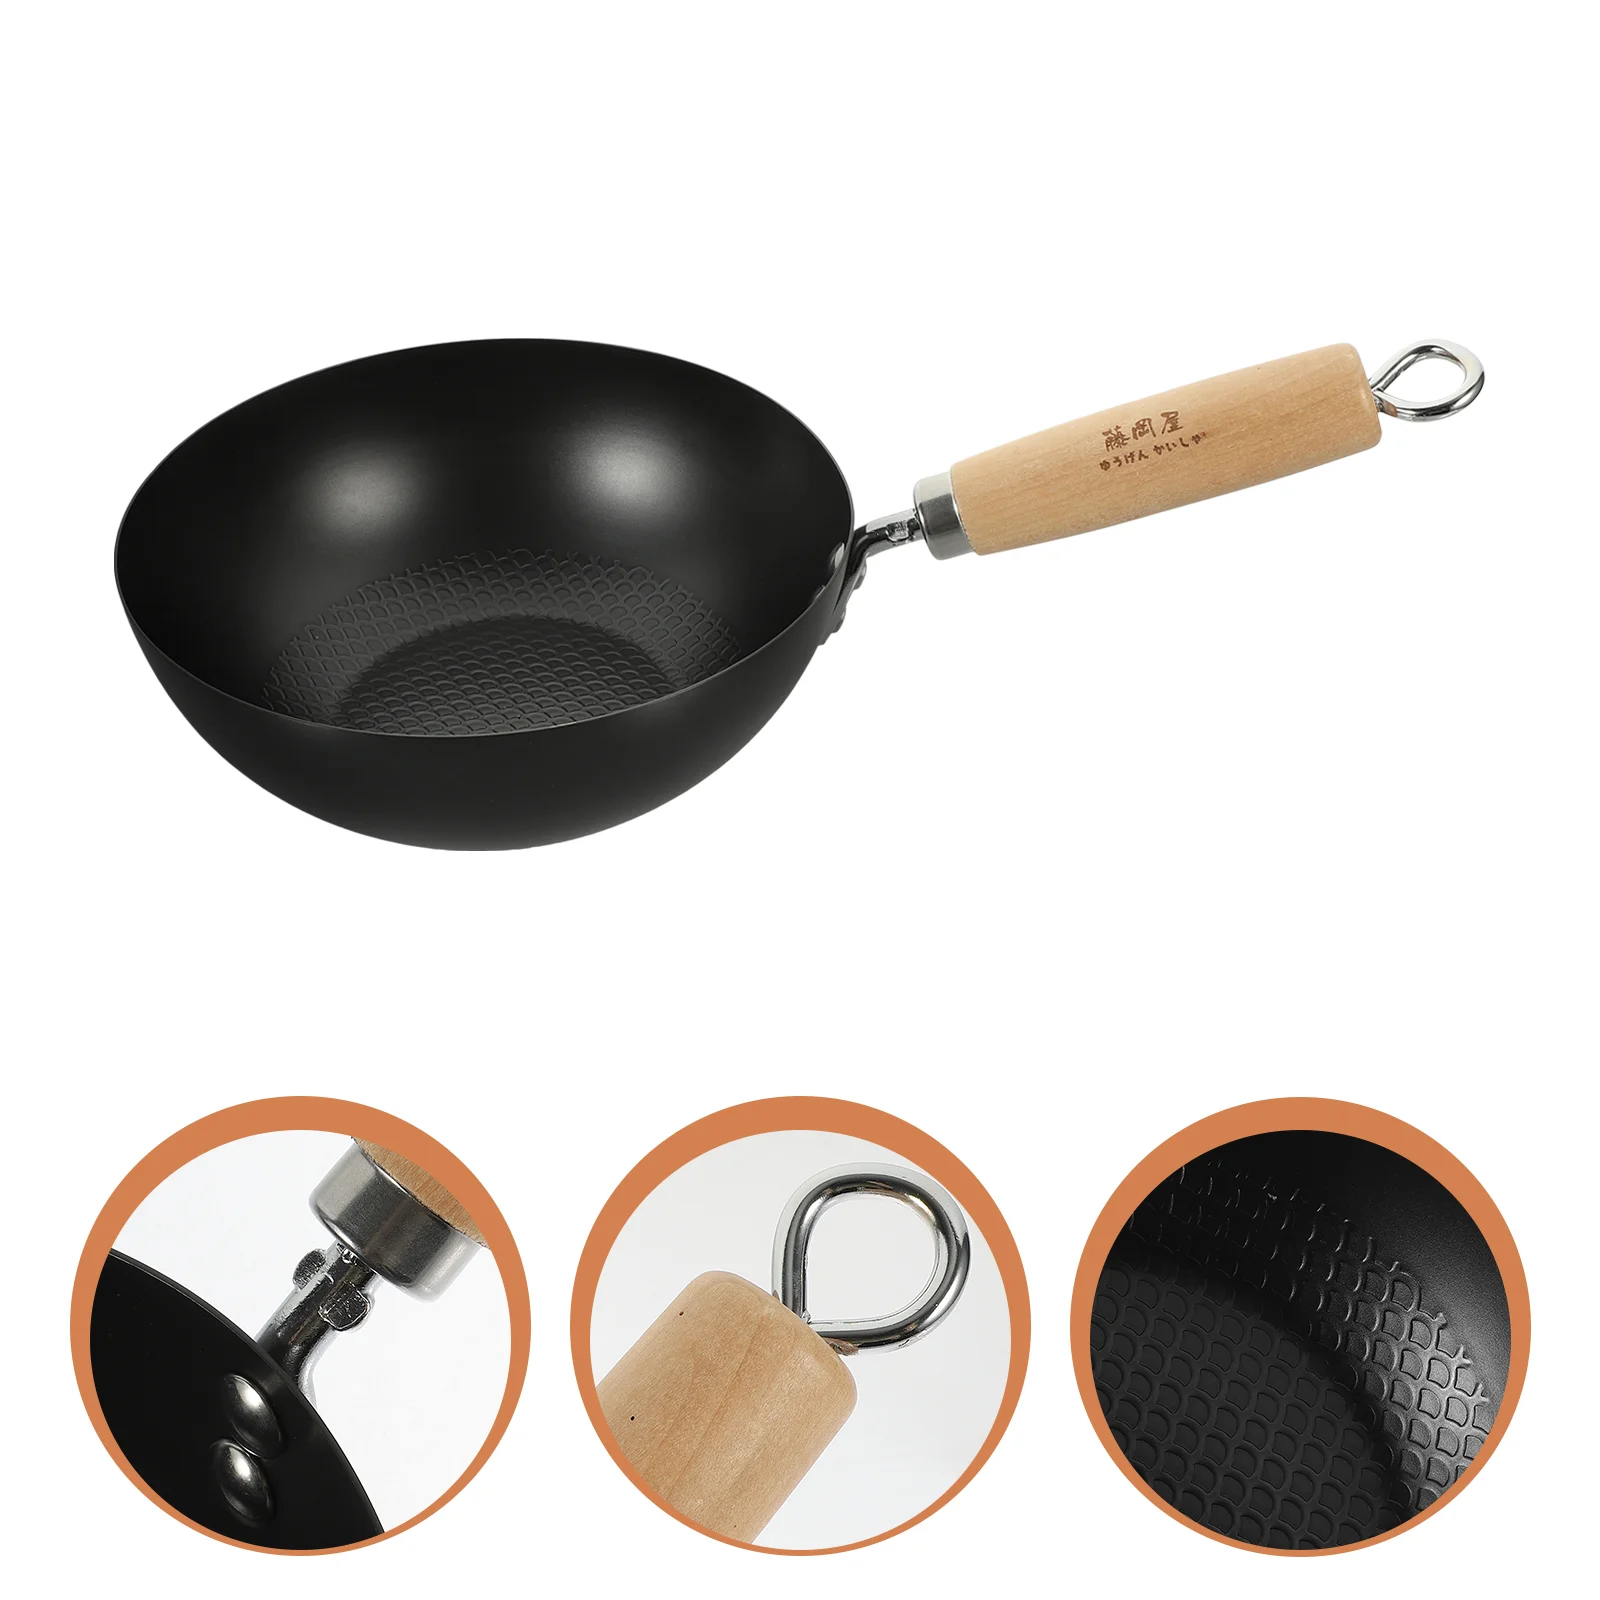 

Frying Pan Induction Hob Home Wok Iron Cooking Pot Electromagnetic Wrought Gas Stove Household Kitchen Supply Japanese Stir-fry